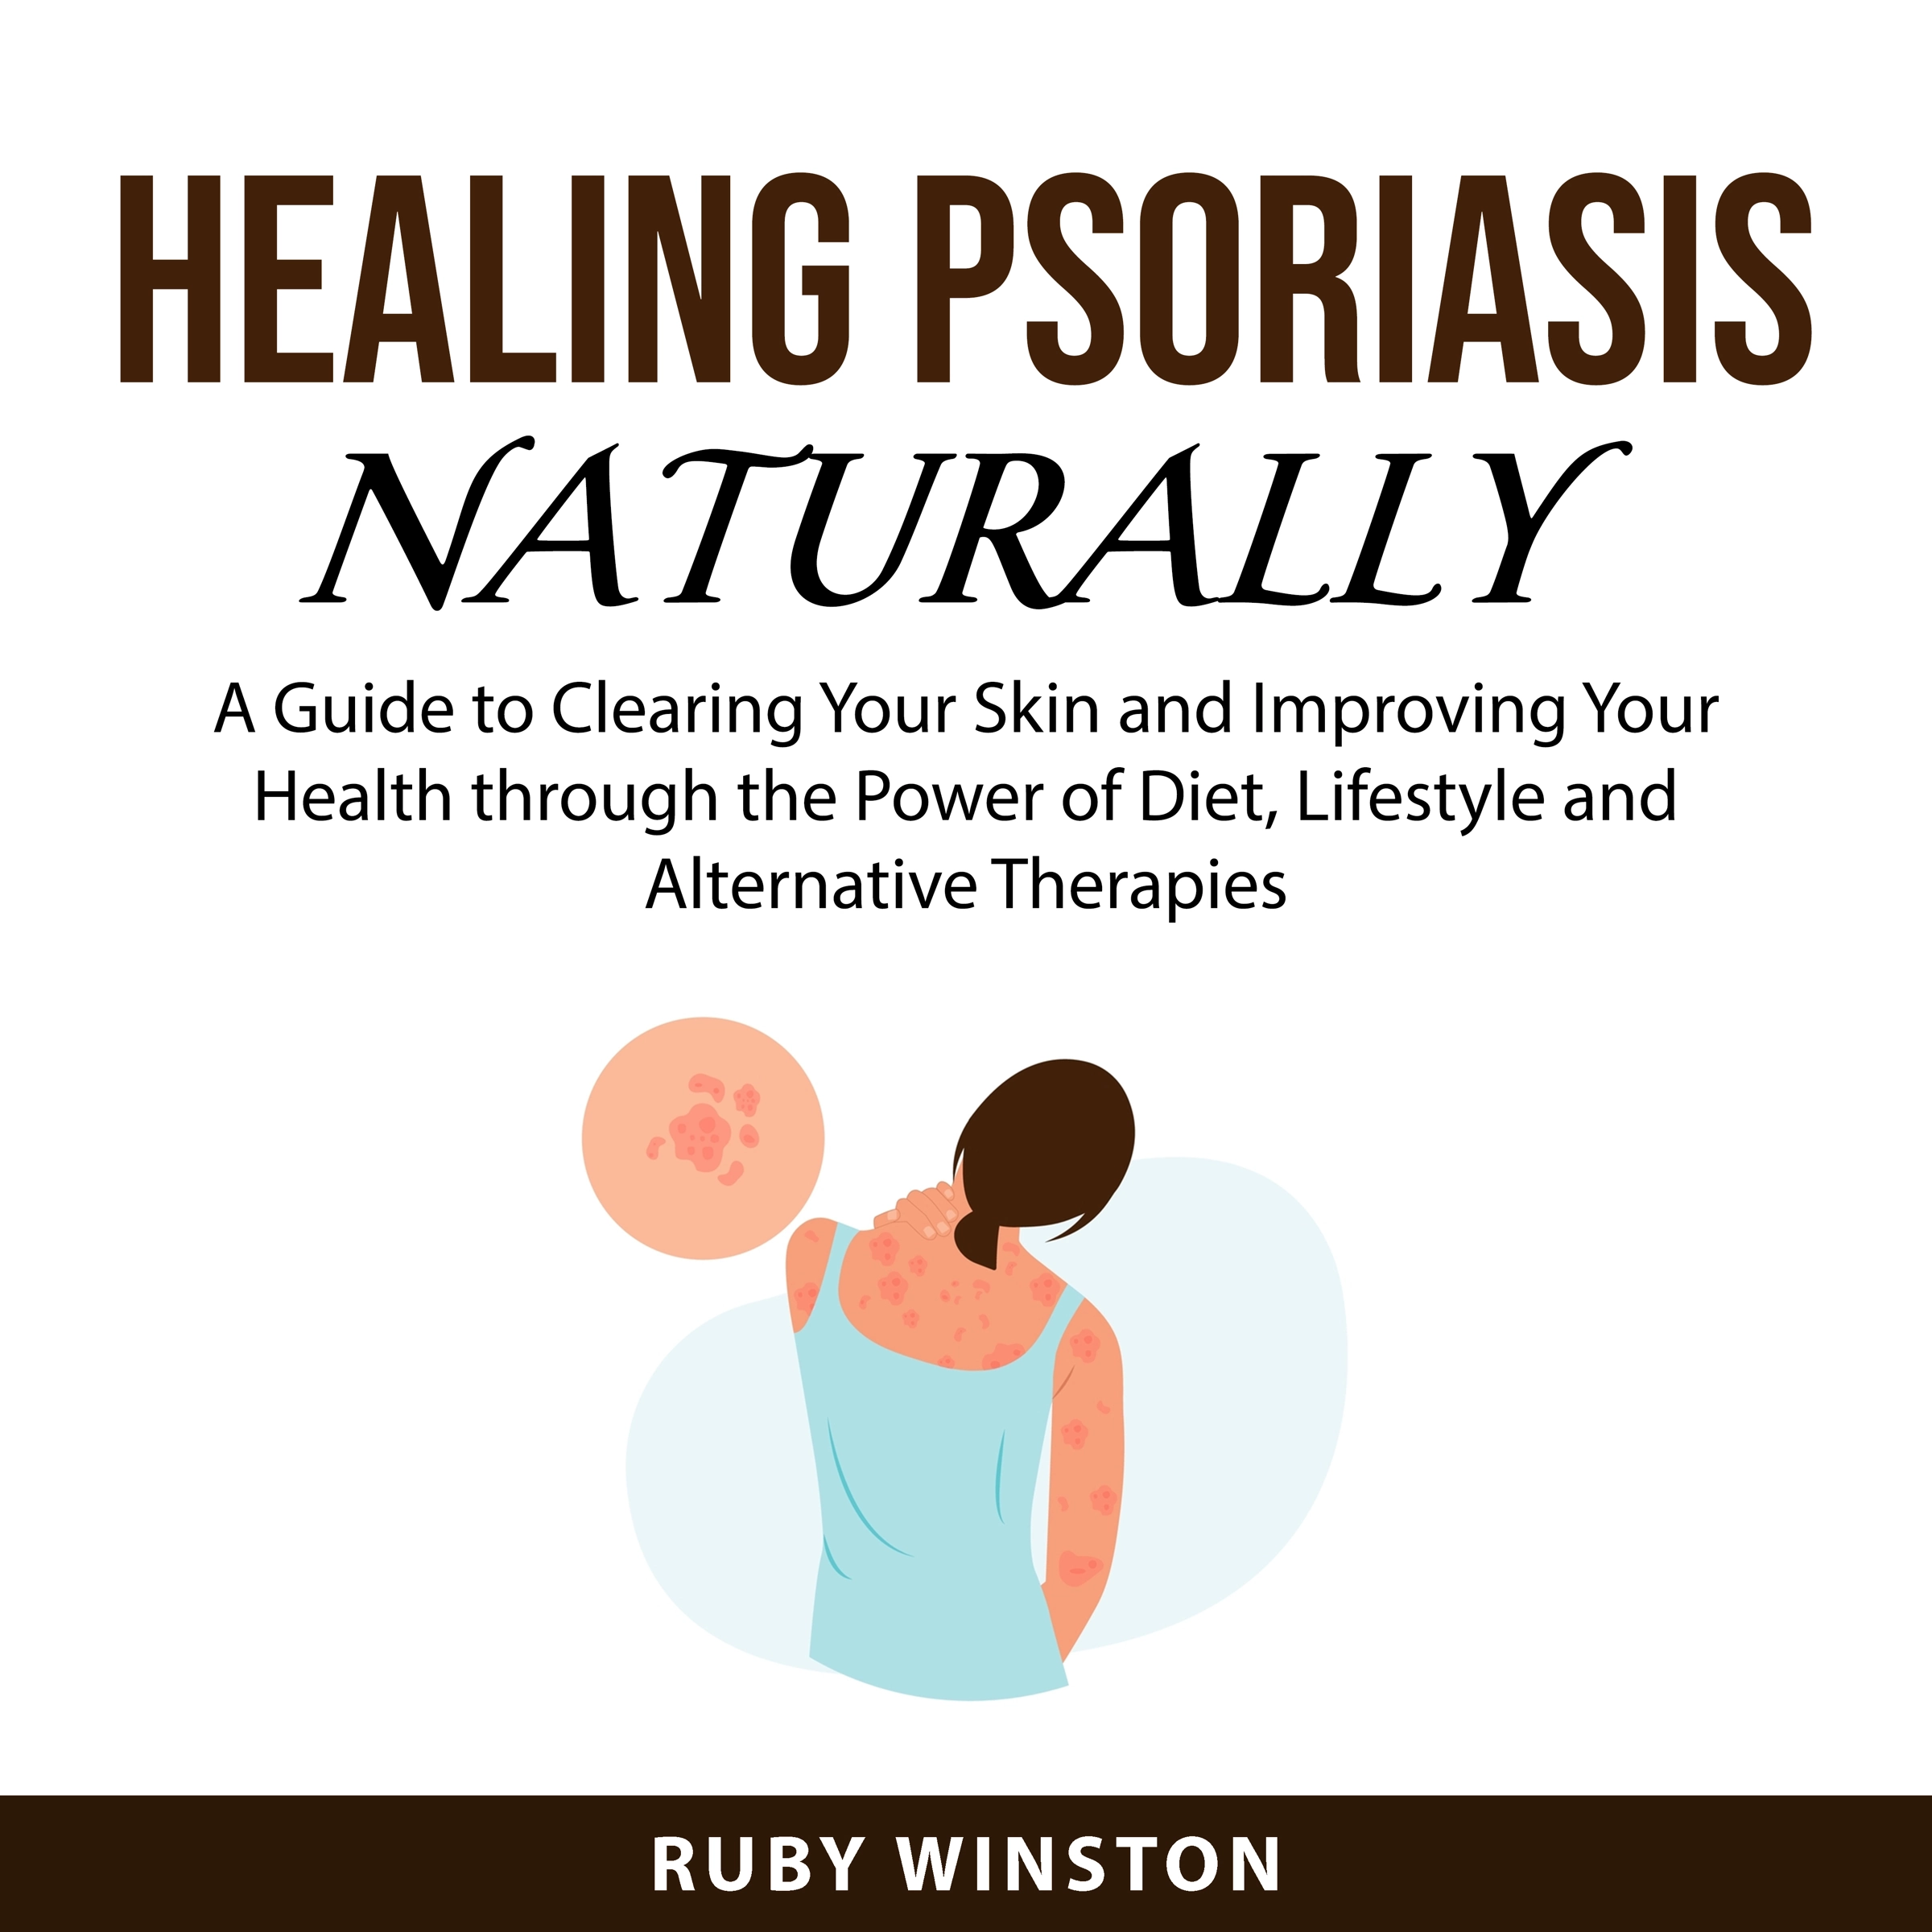 Healing Psoriasis Naturally Audiobook by Ruby Winston